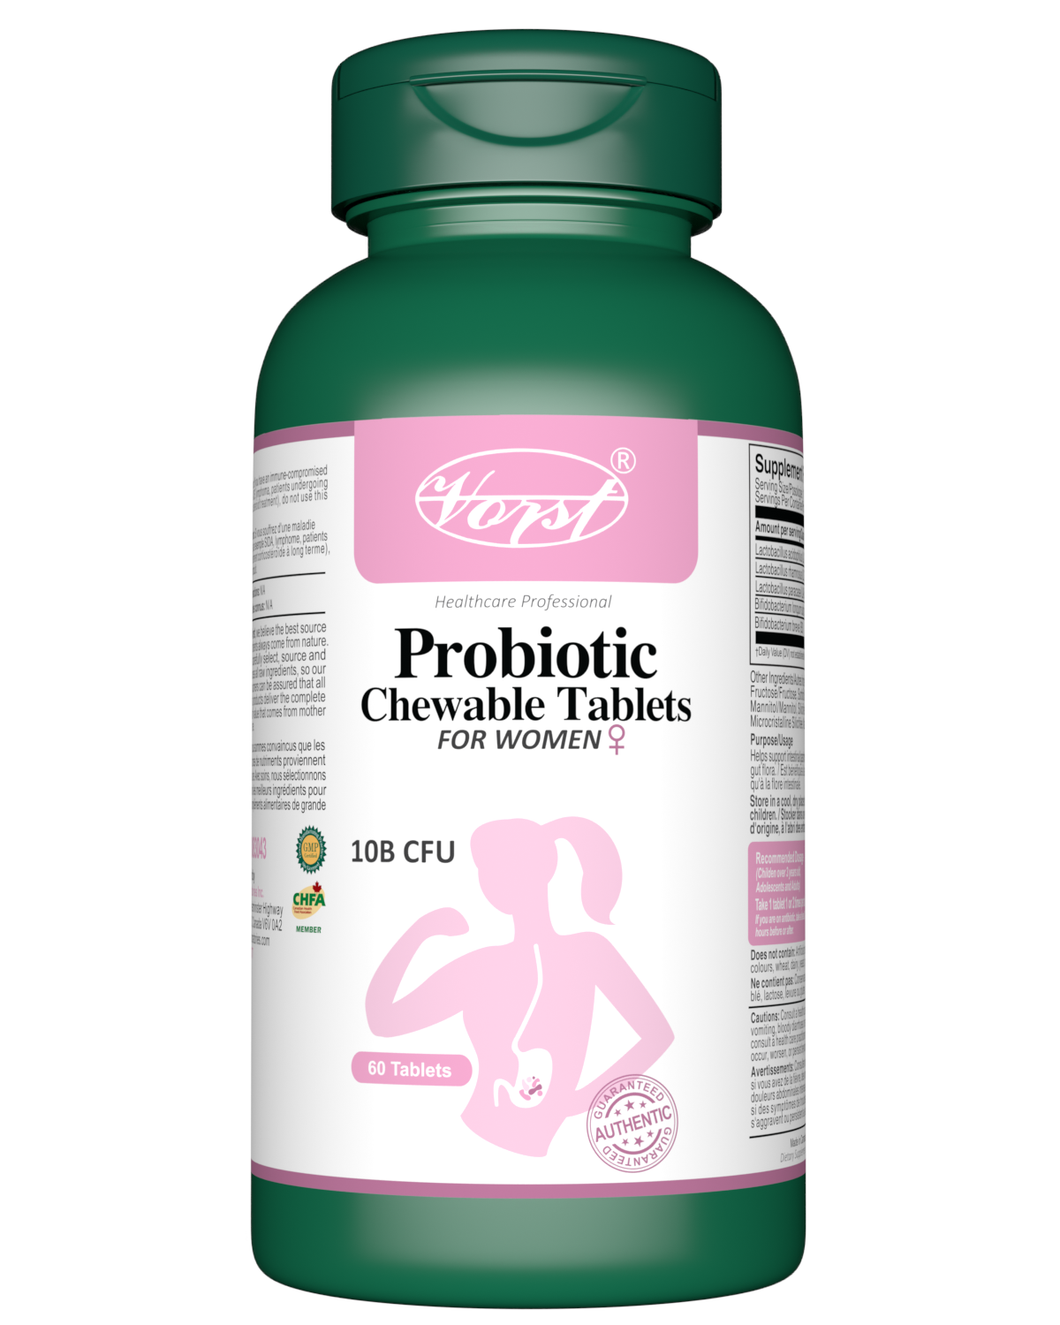 Probiotic Chewable Tablets for Women 60 Tablets